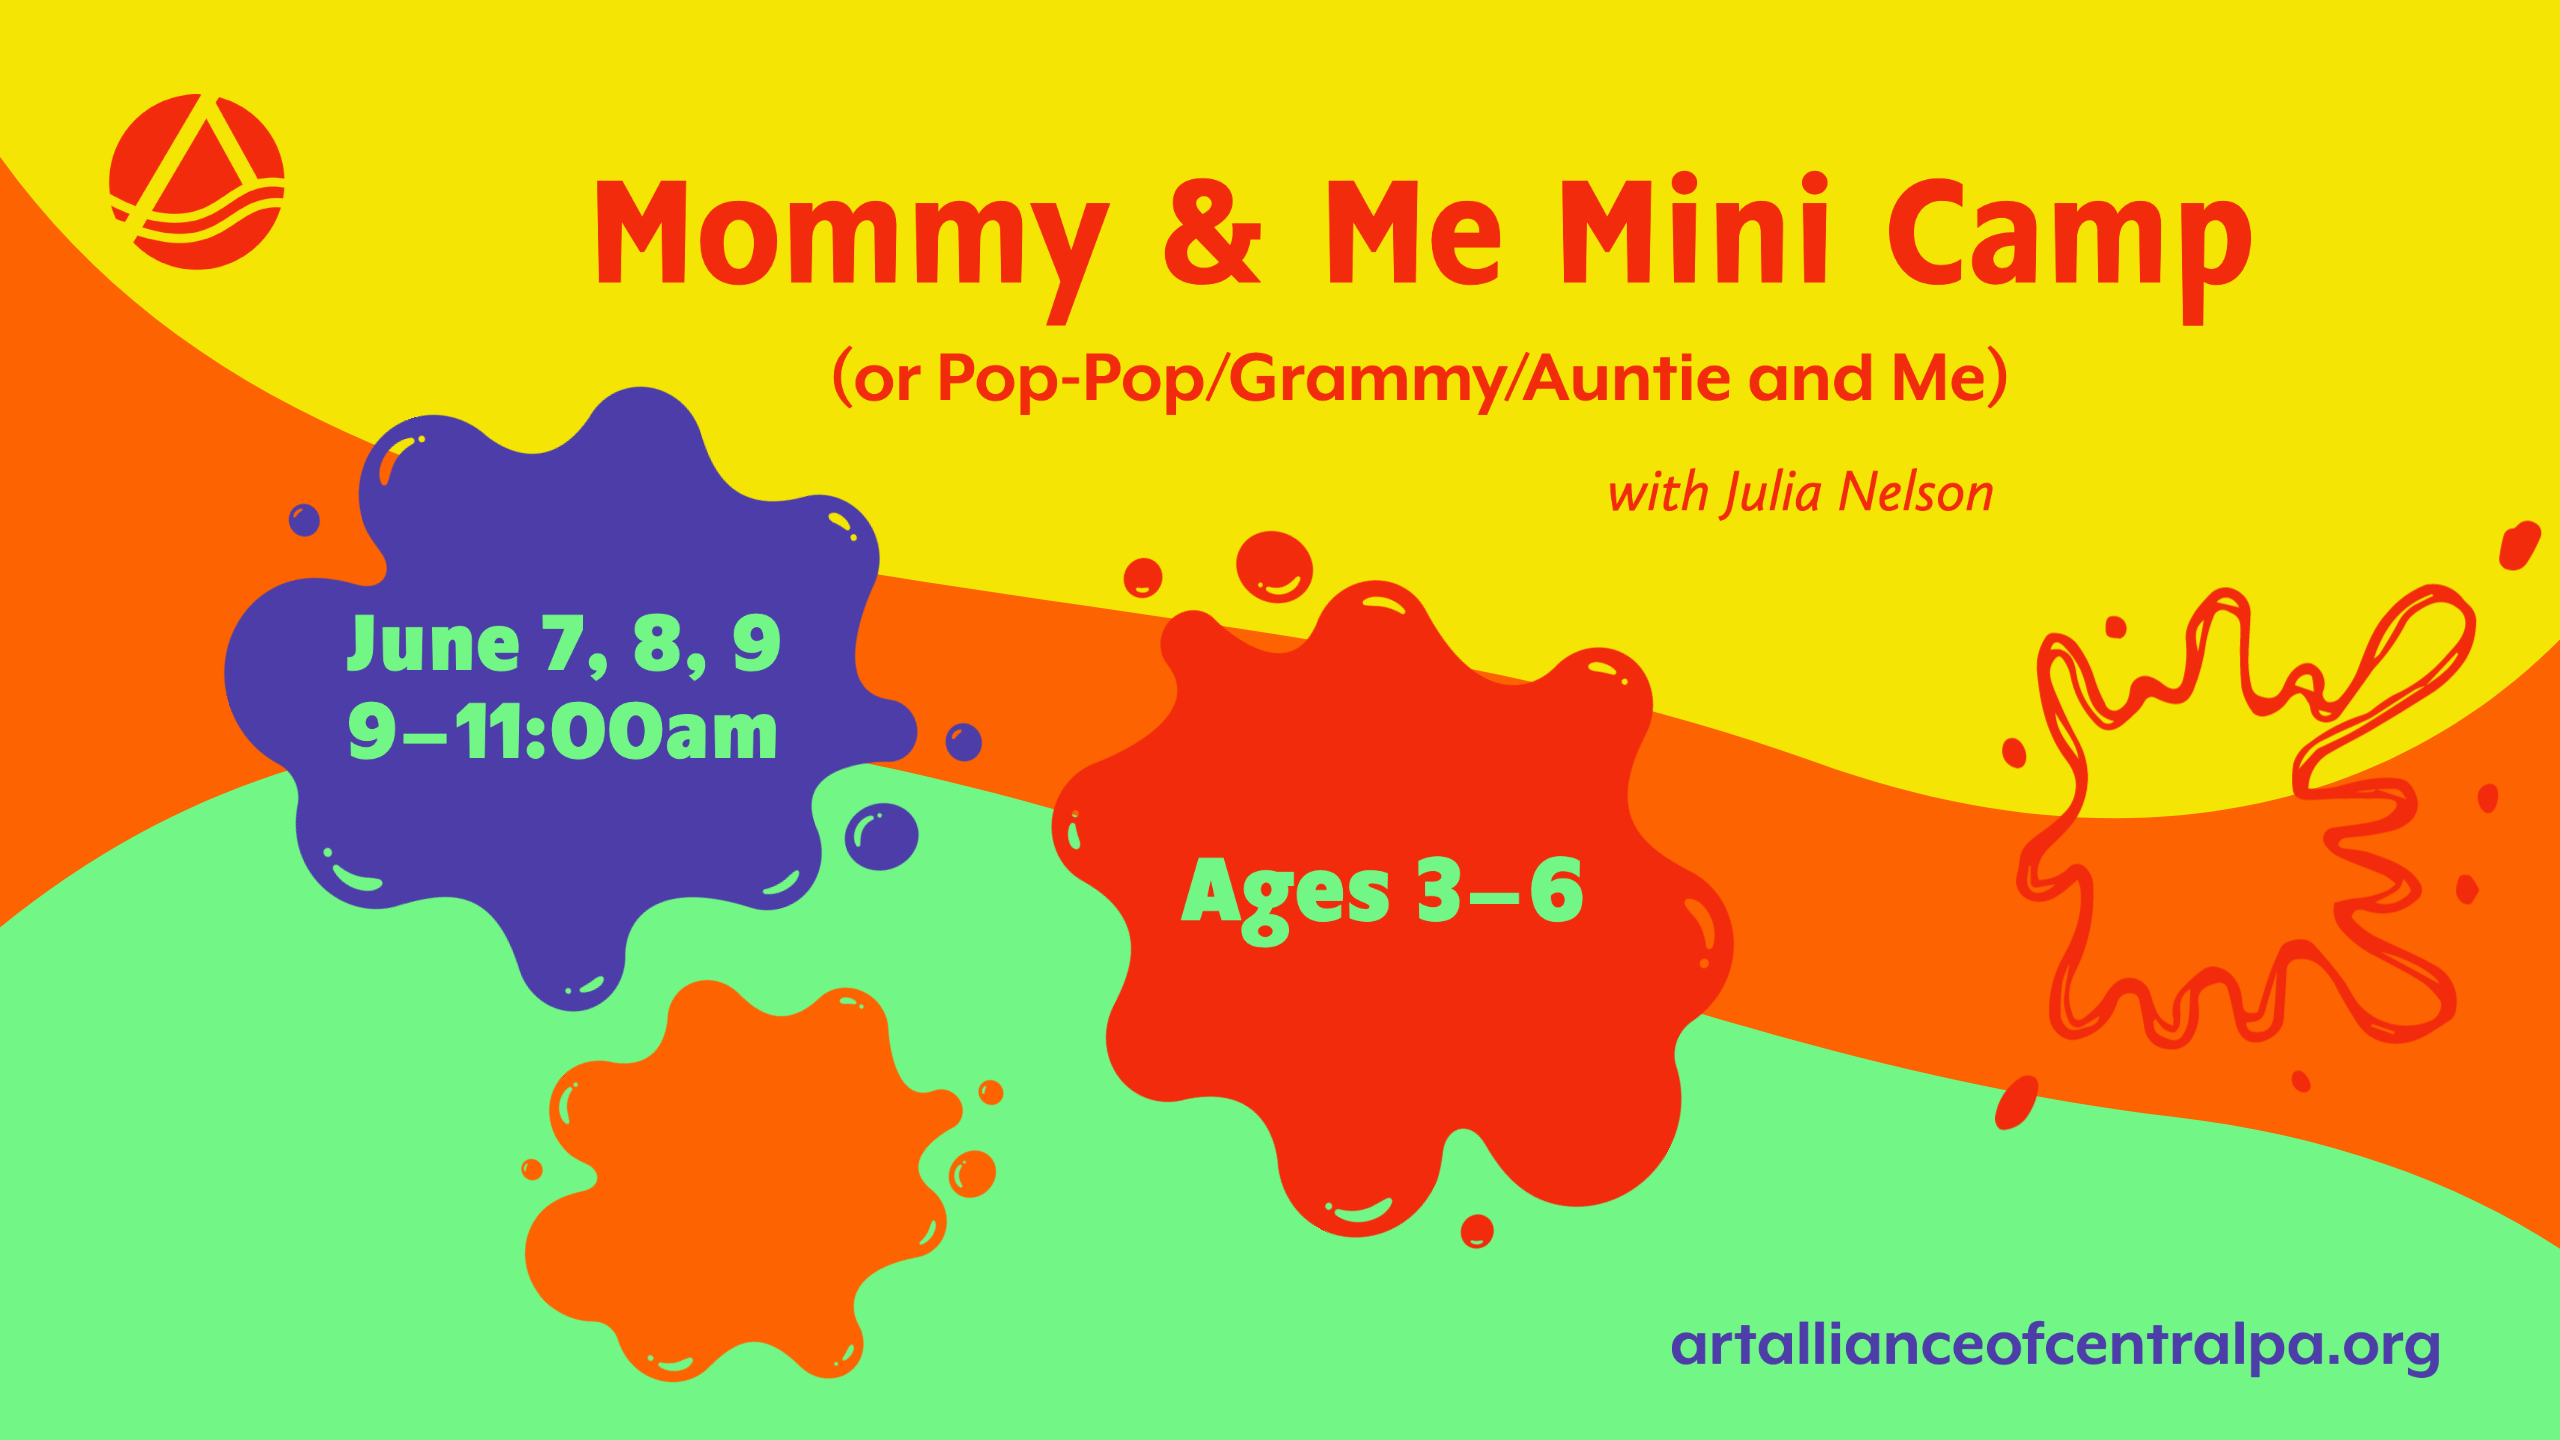 Mommy and Me Mini Camp January 27, 2022